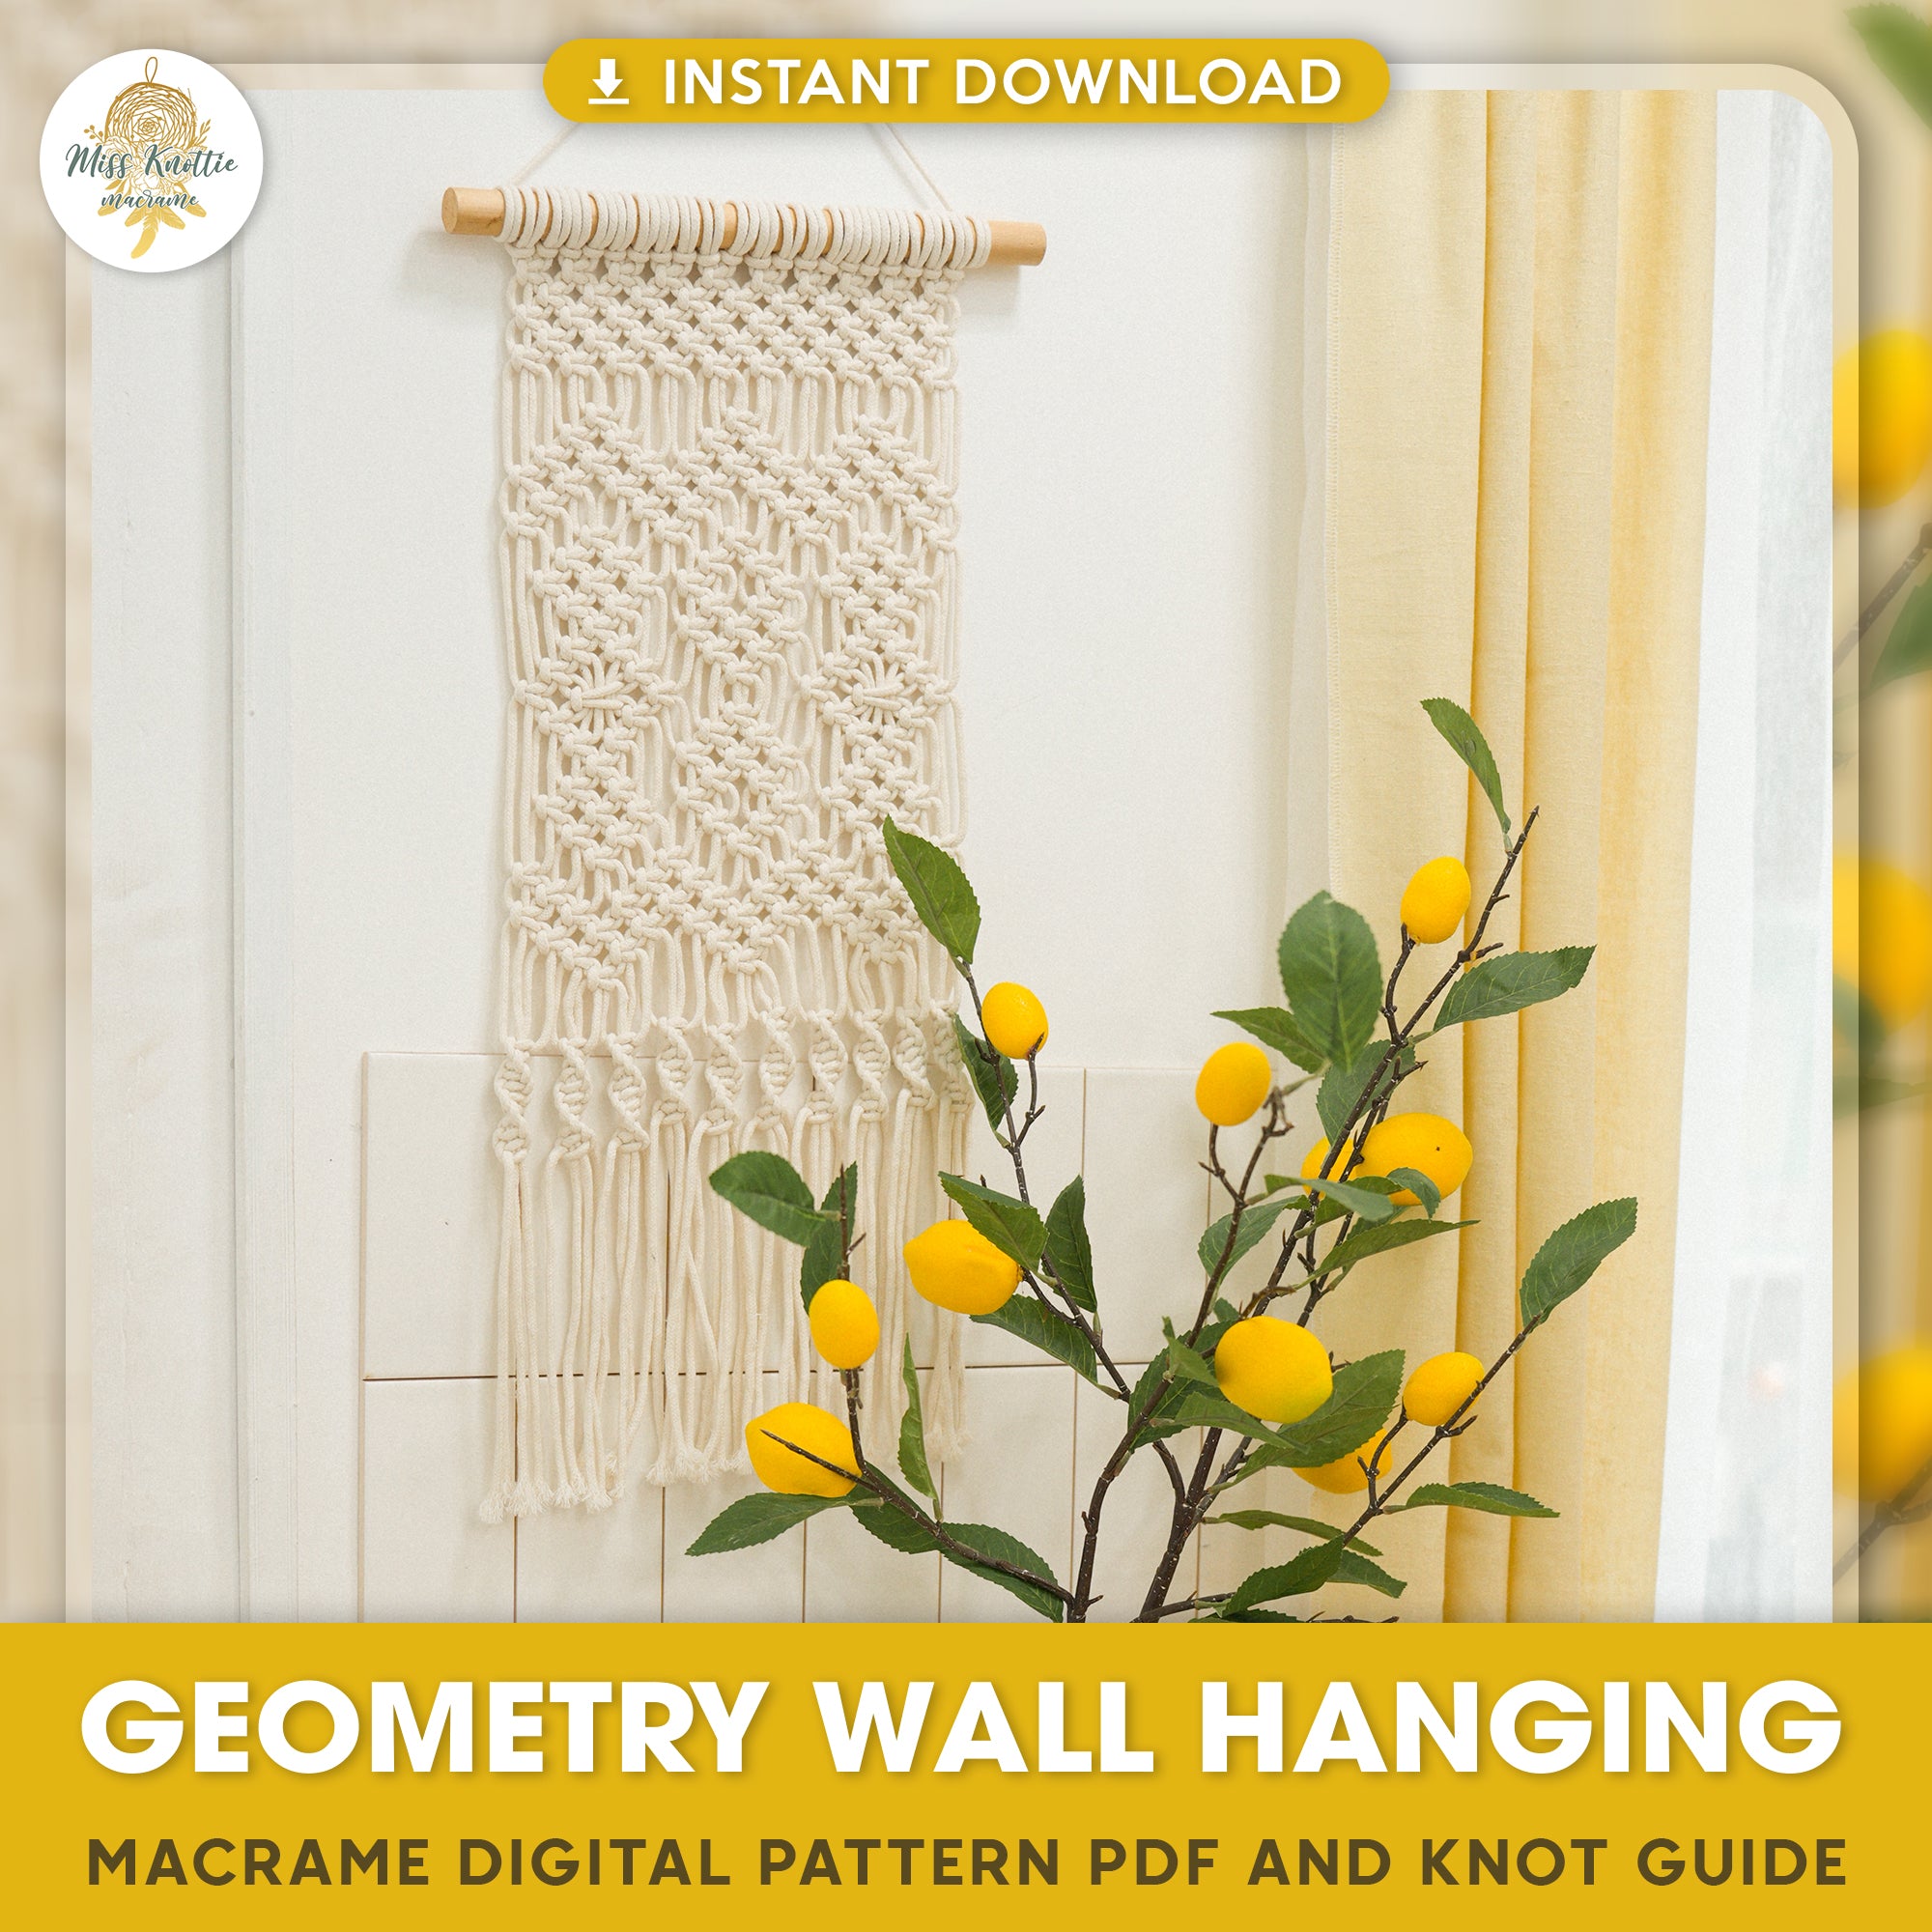 Geometry Wall Hanging - Digital PDF and Knot Guide